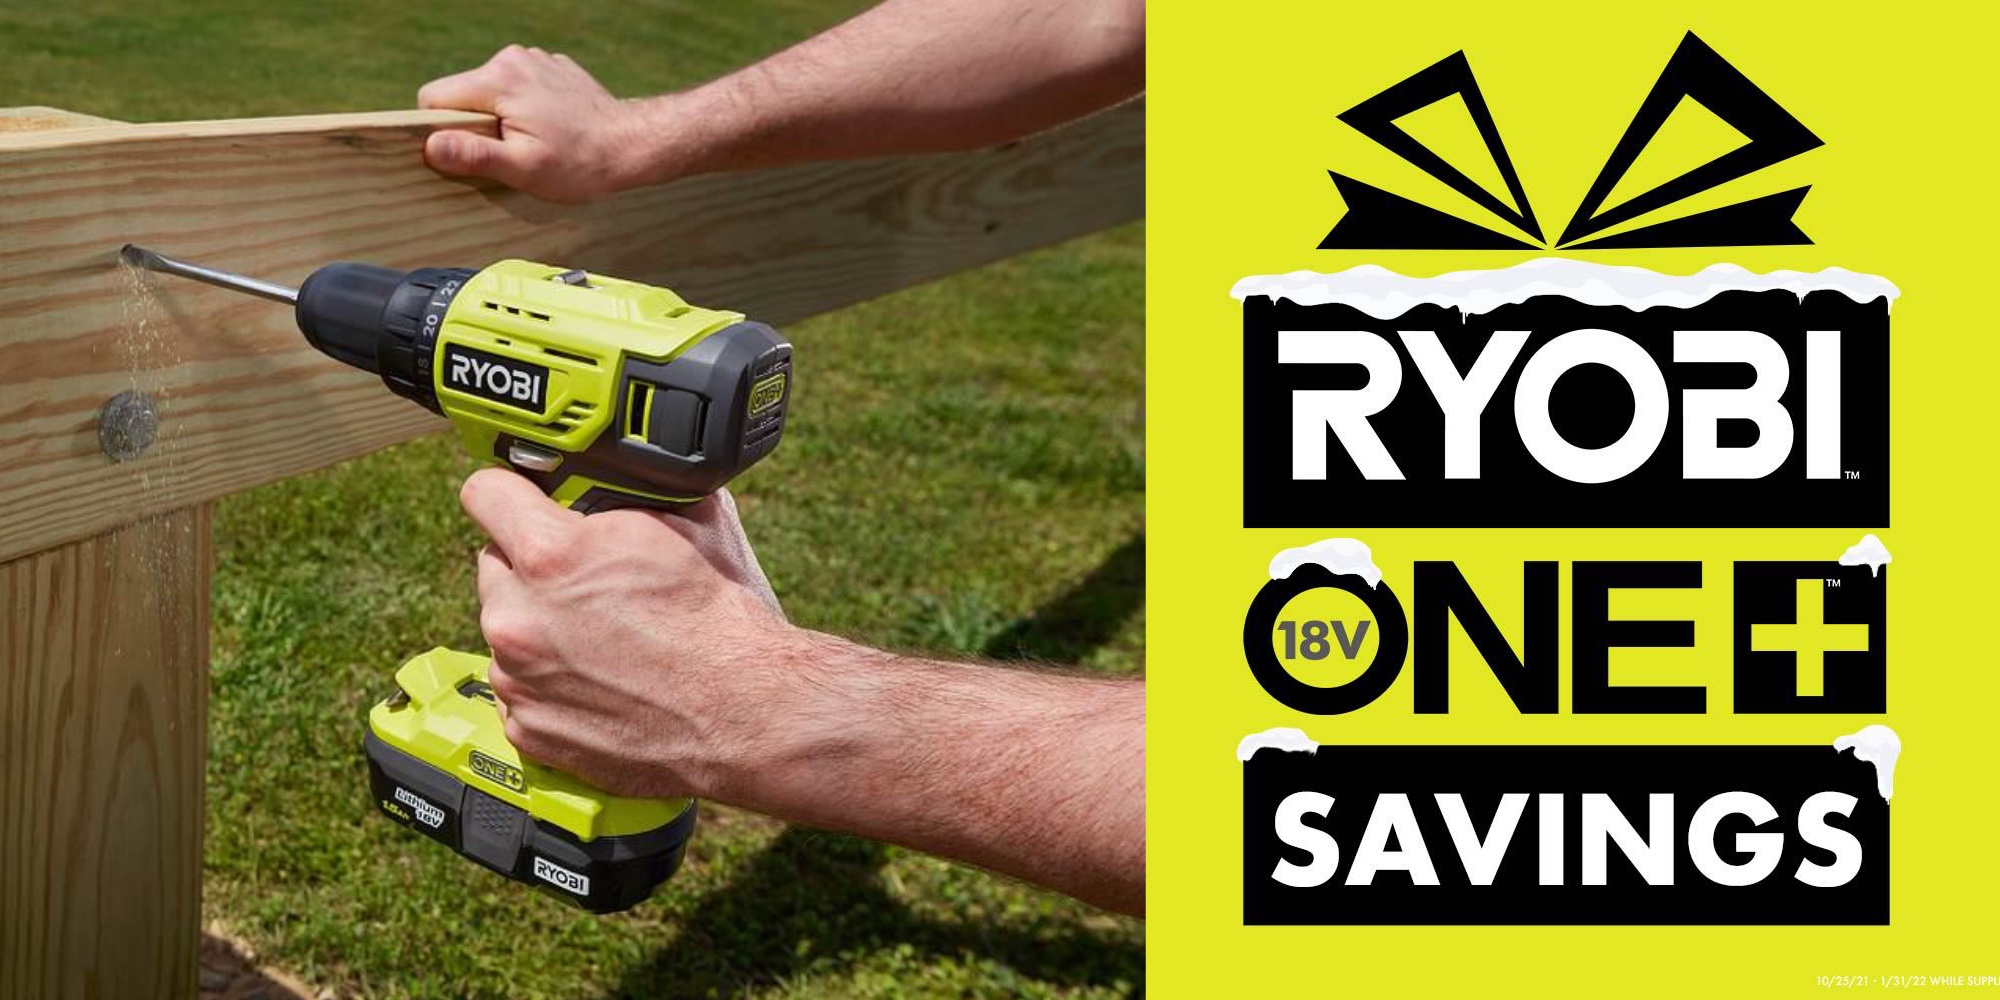 home-depot-s-ryobi-one-savings-event-takes-up-to-300-off-tools-combo